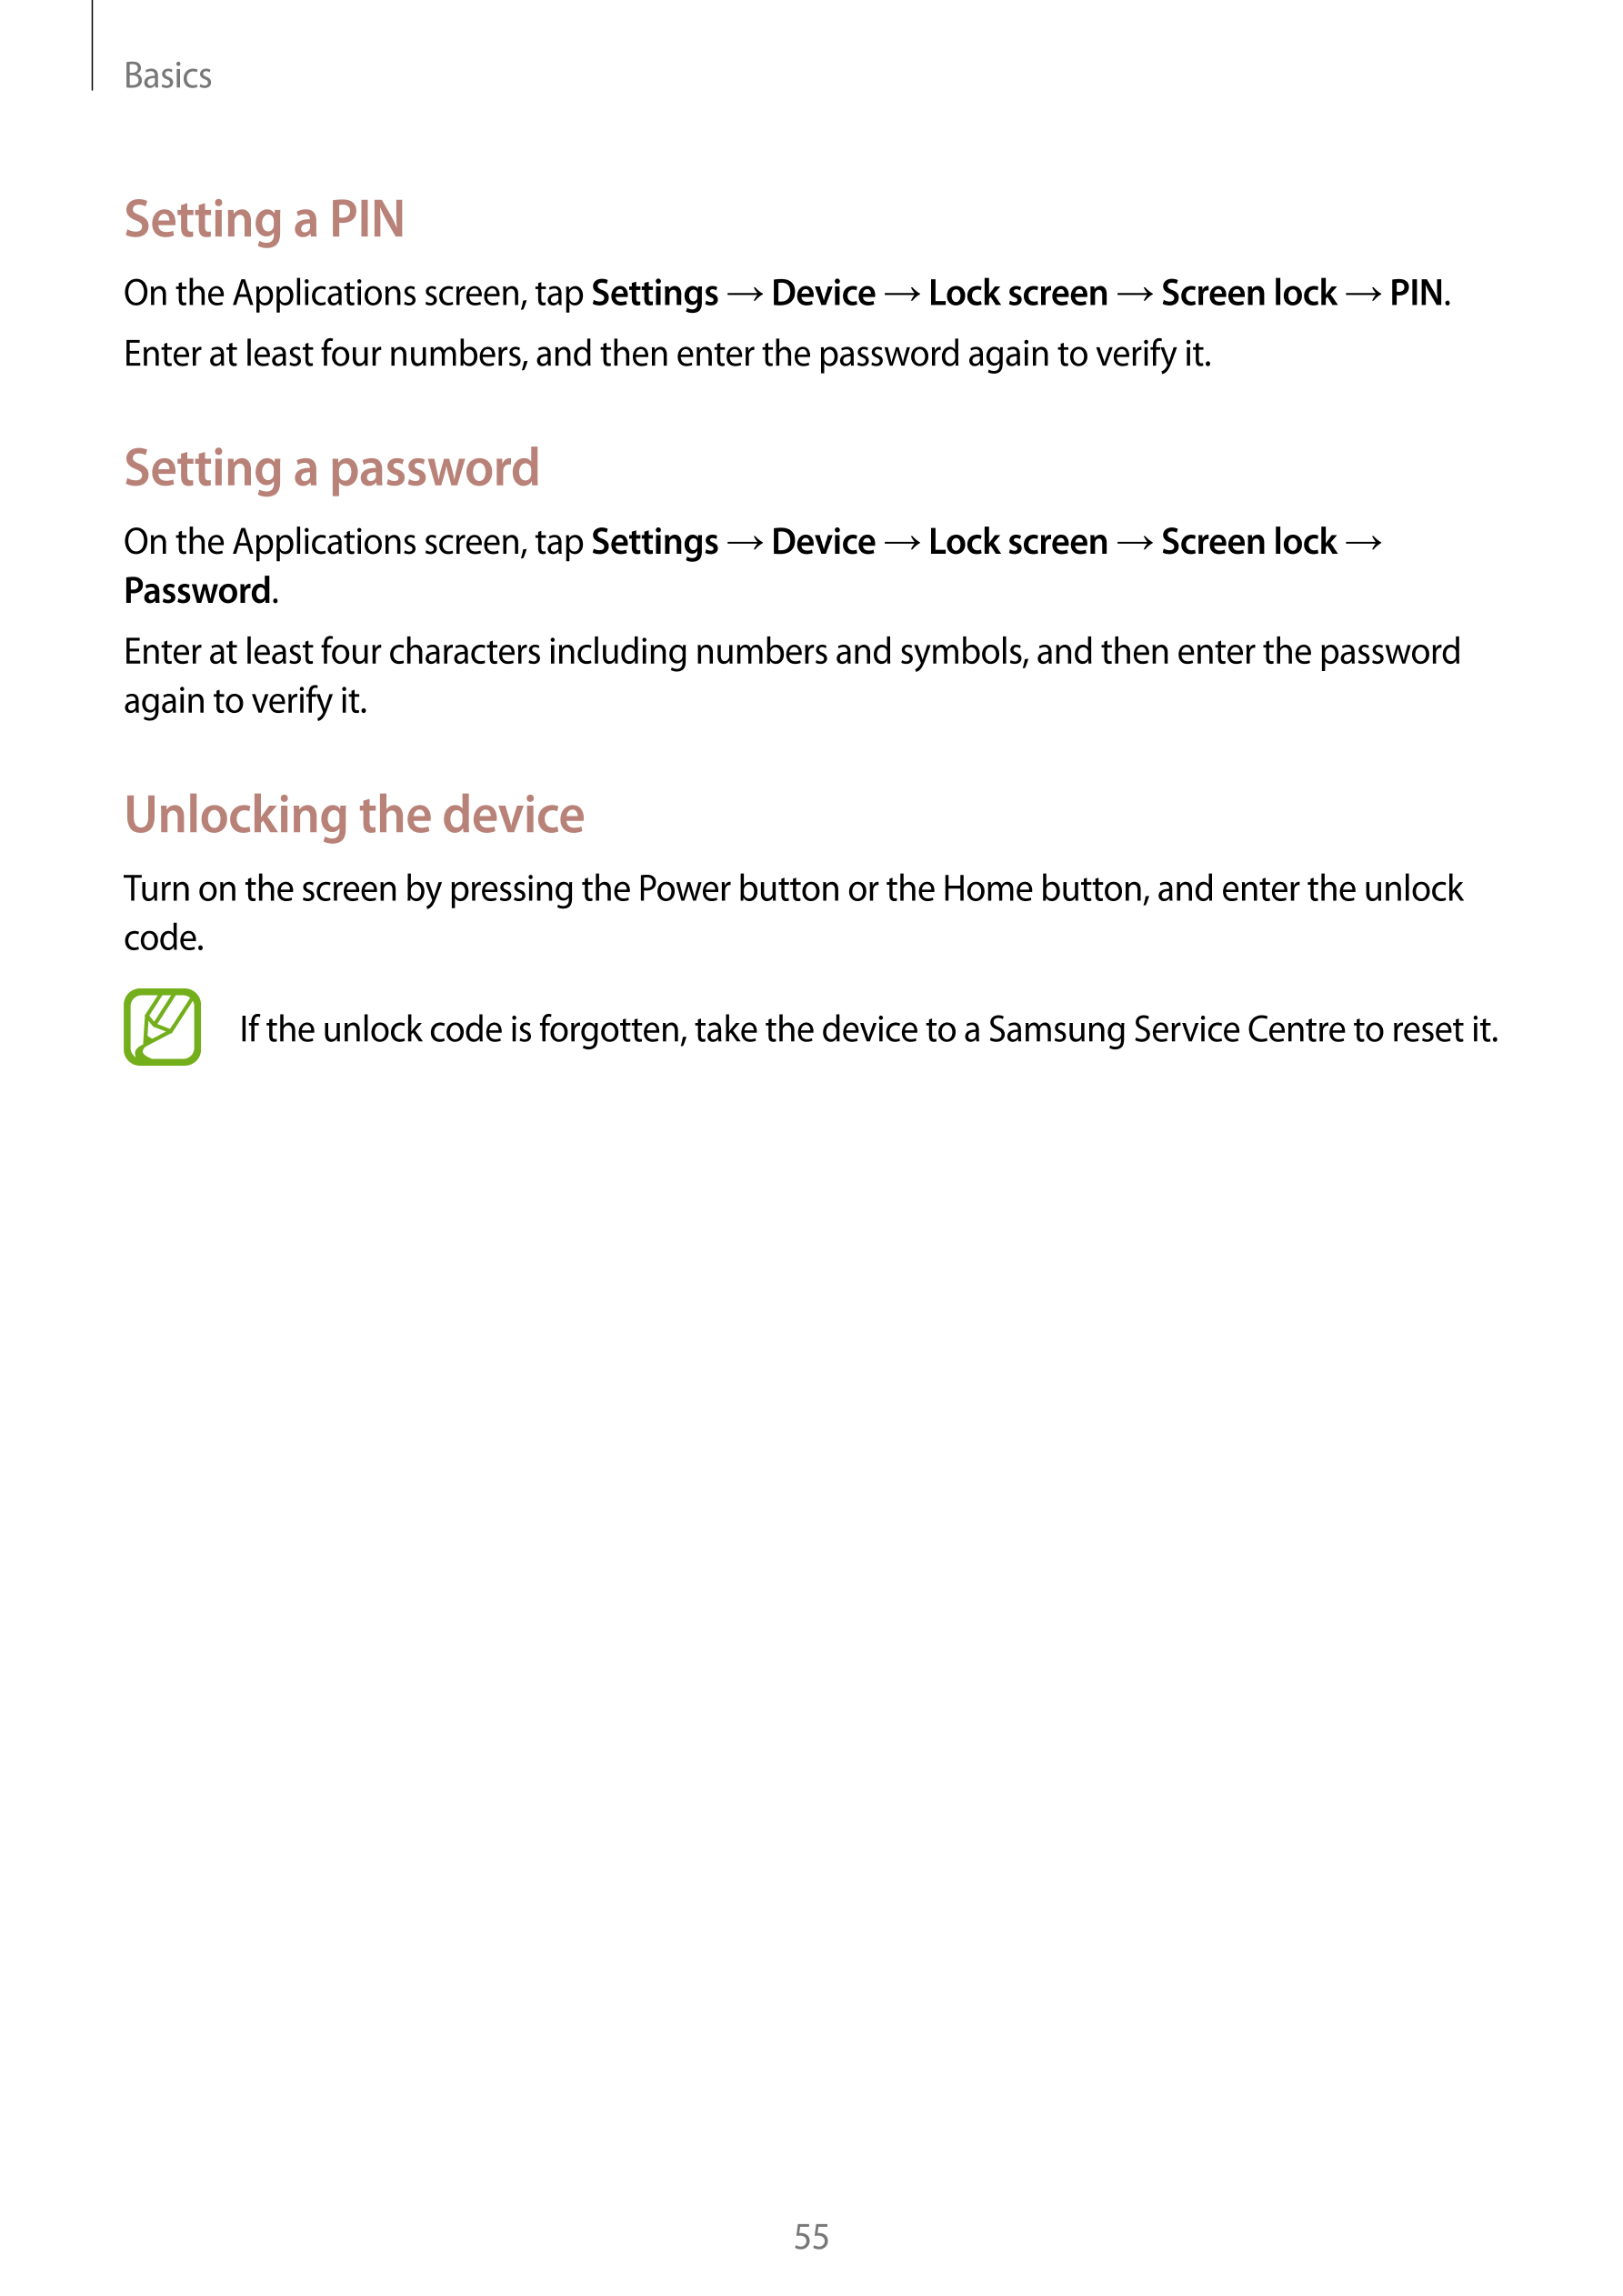 Basics
Setting a PIN
On the Applications screen, tap  Settings  →  Device  →  Lock screen  →  Screen lock  →  PIN.
Enter at leas